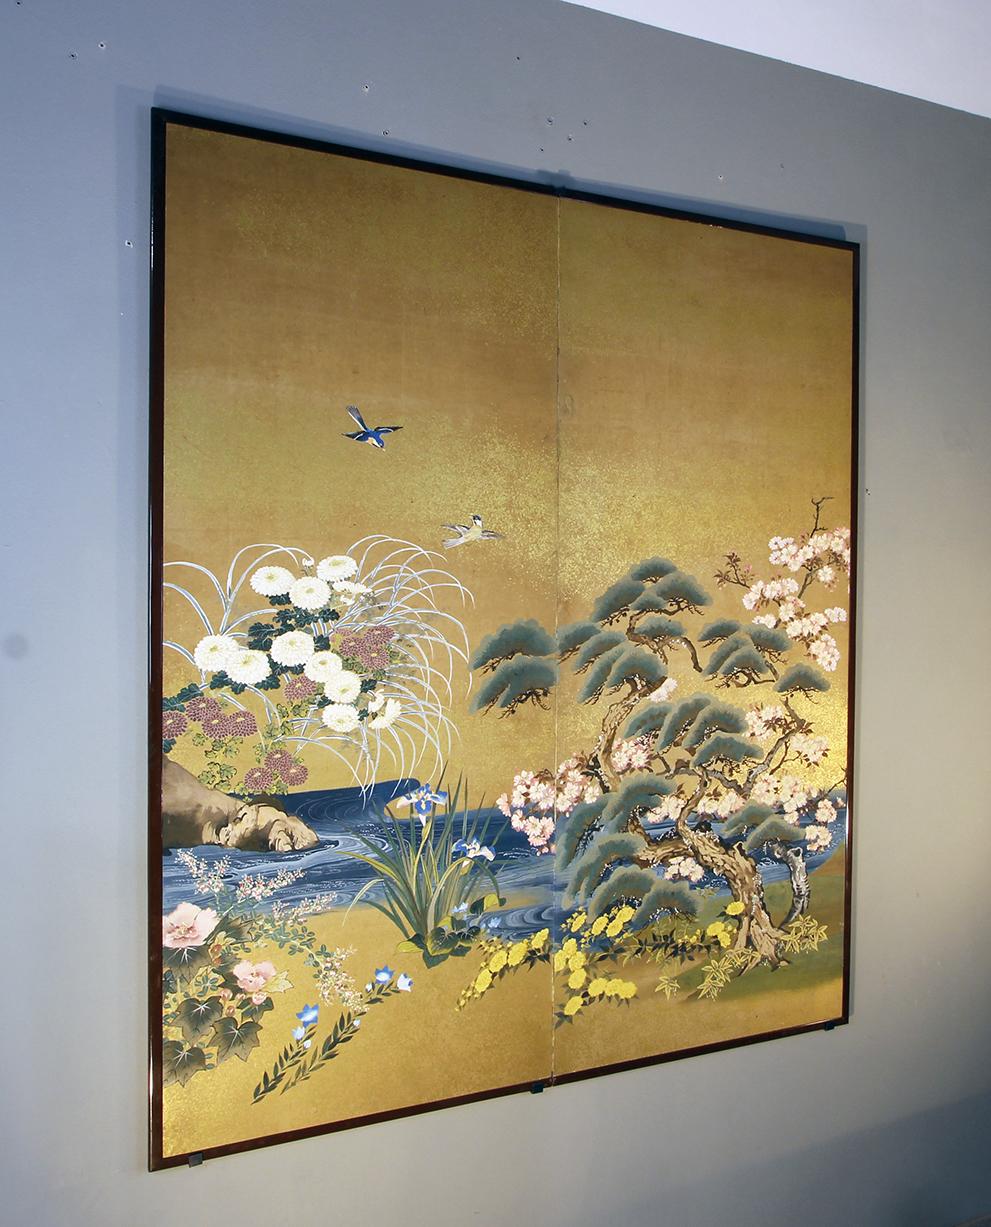 20th Century Meiji Period Japanese Two Panel Screen Painted on Rice Paper with Gold Grains